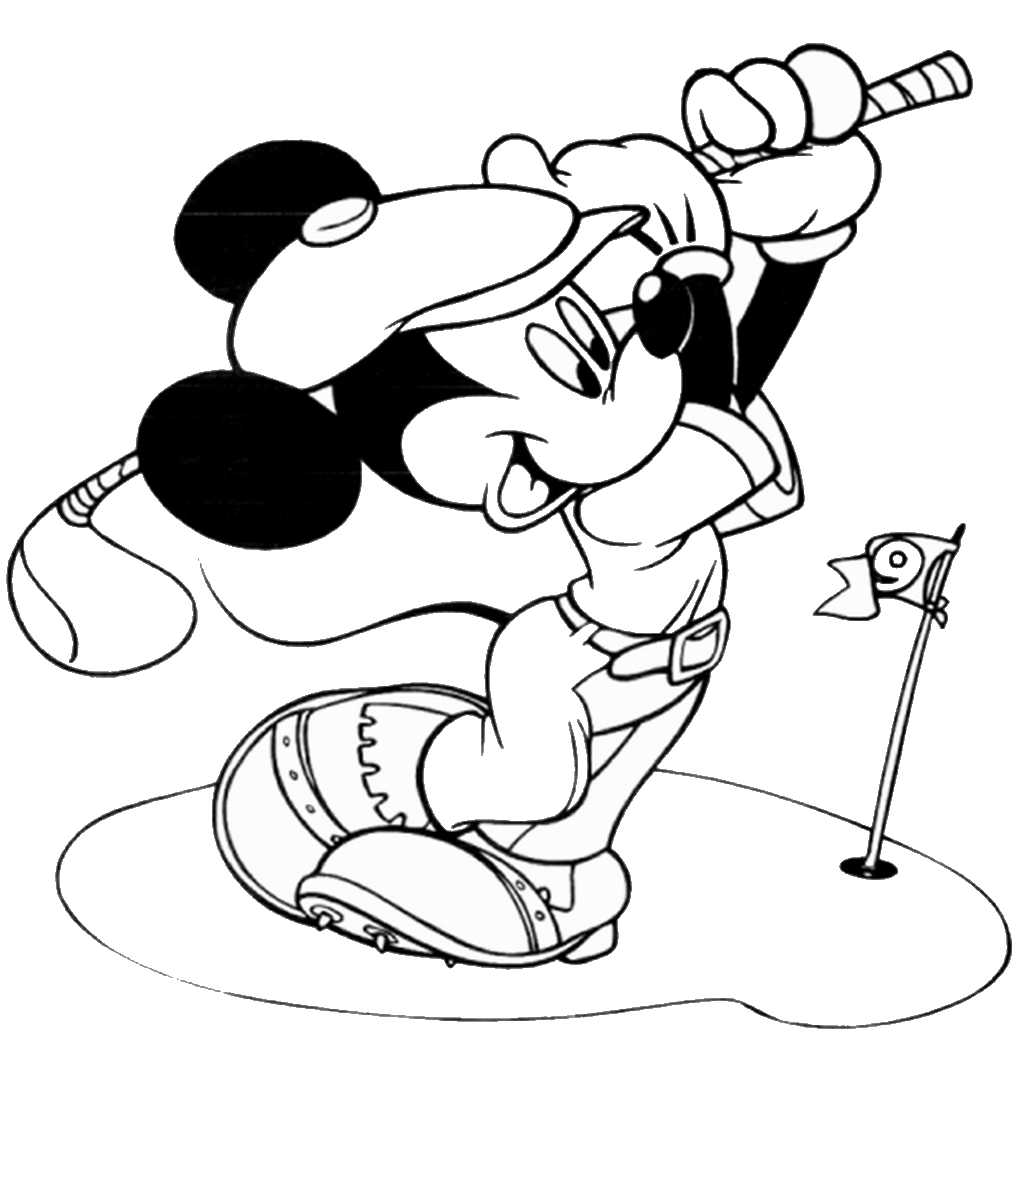 Golf Coloring Pages for Kids golf_coloring_17 Printable 2021 276 Coloring4free